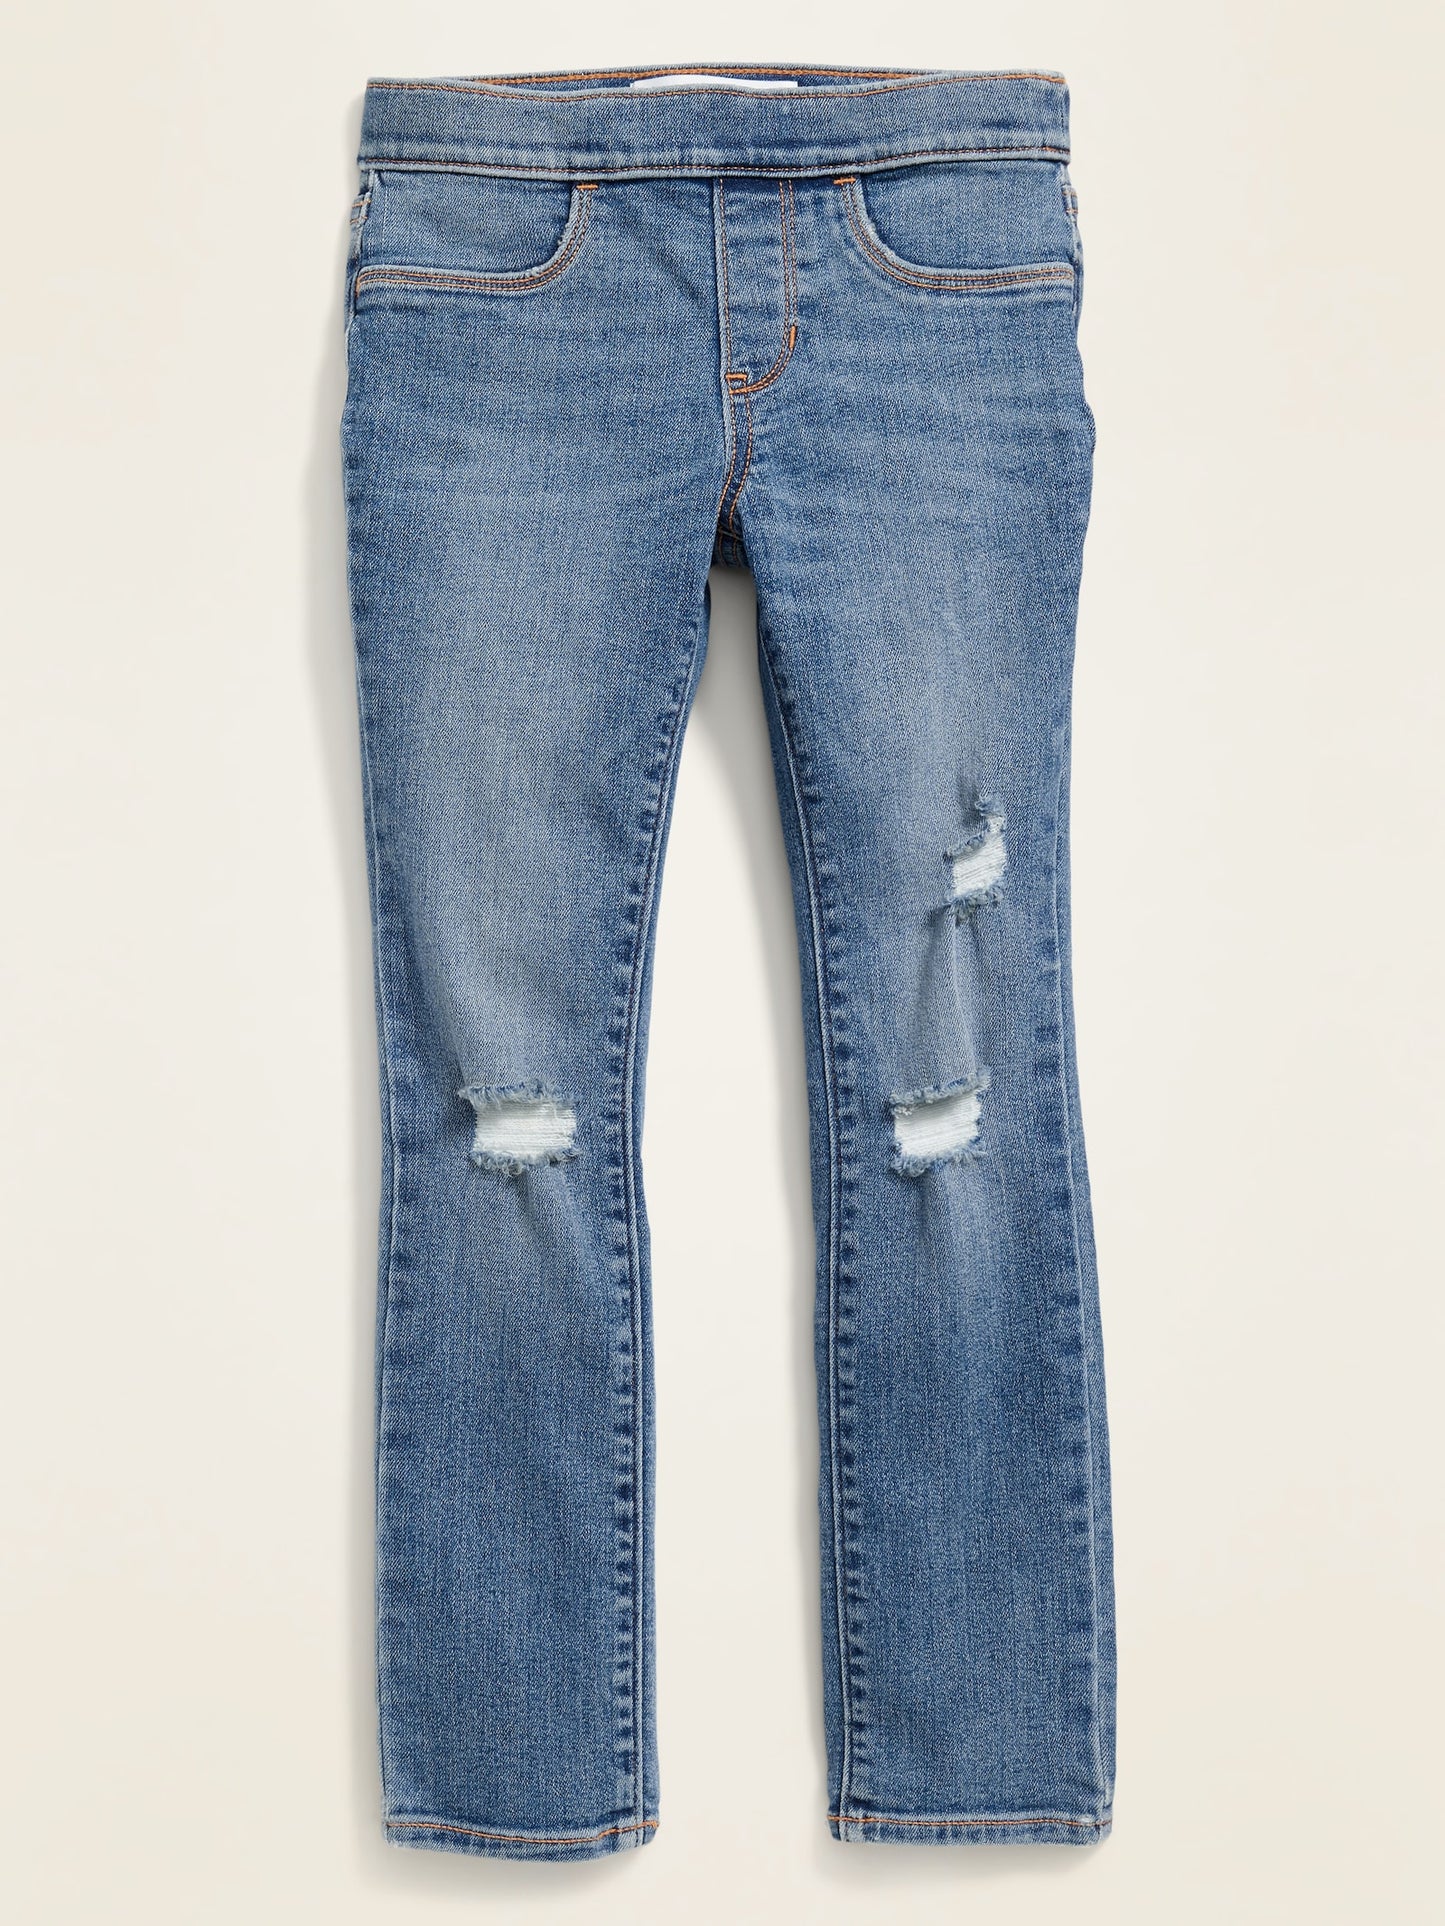 Skinny Built-In Tough Distressed Pull-On Jeans for Girls Olx Pull On Fashion Skinny Sunset